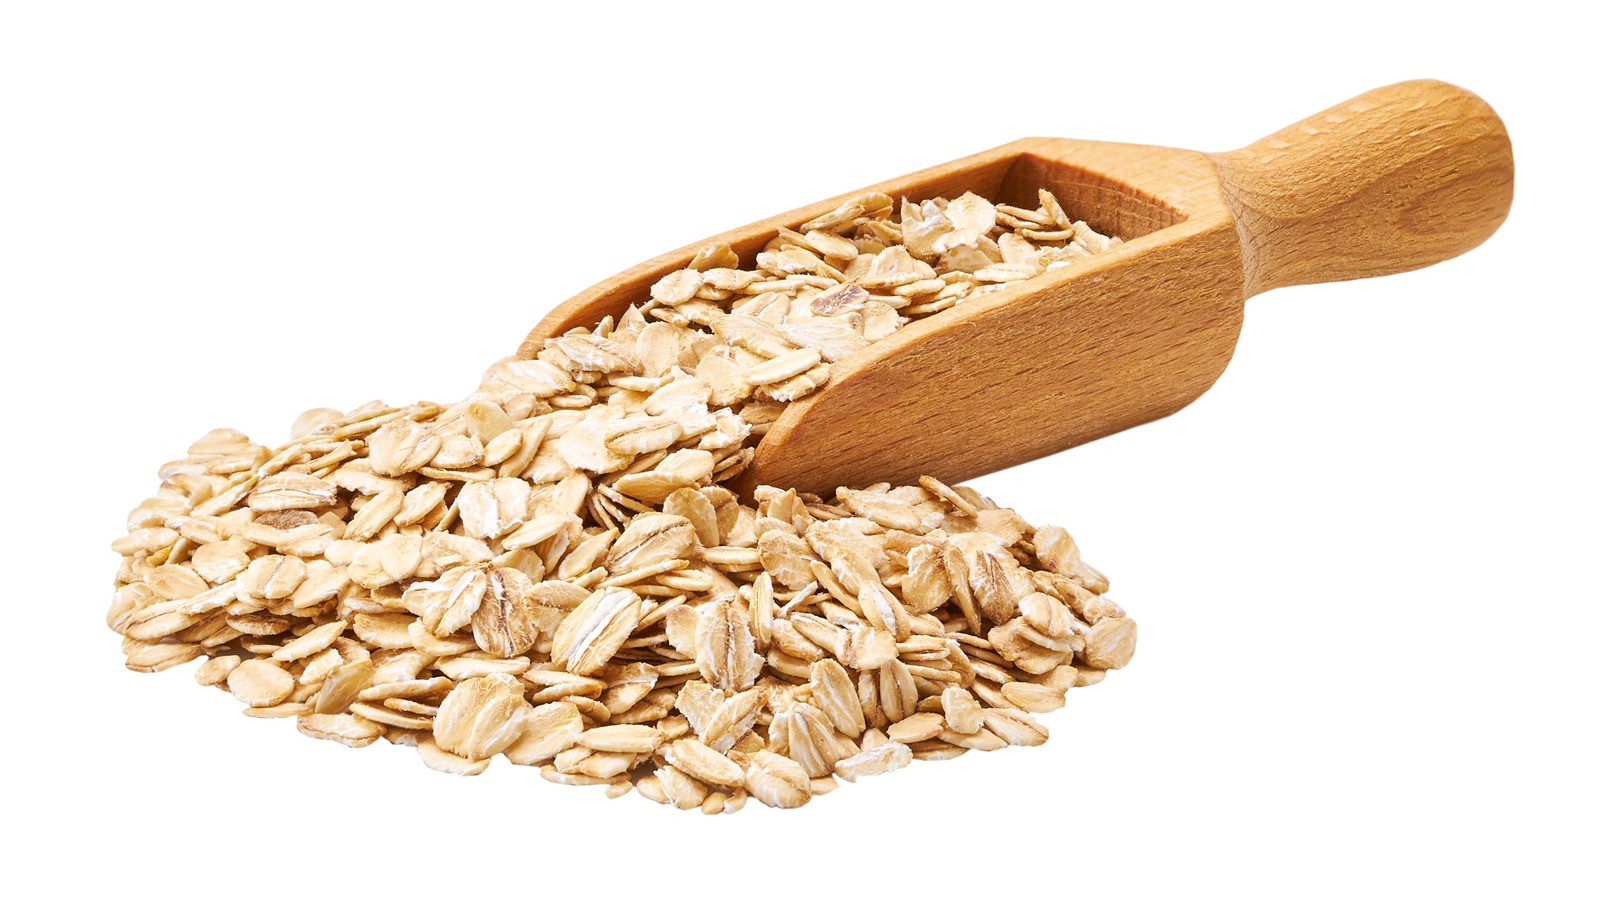 Are All Oats Gluten-Free?